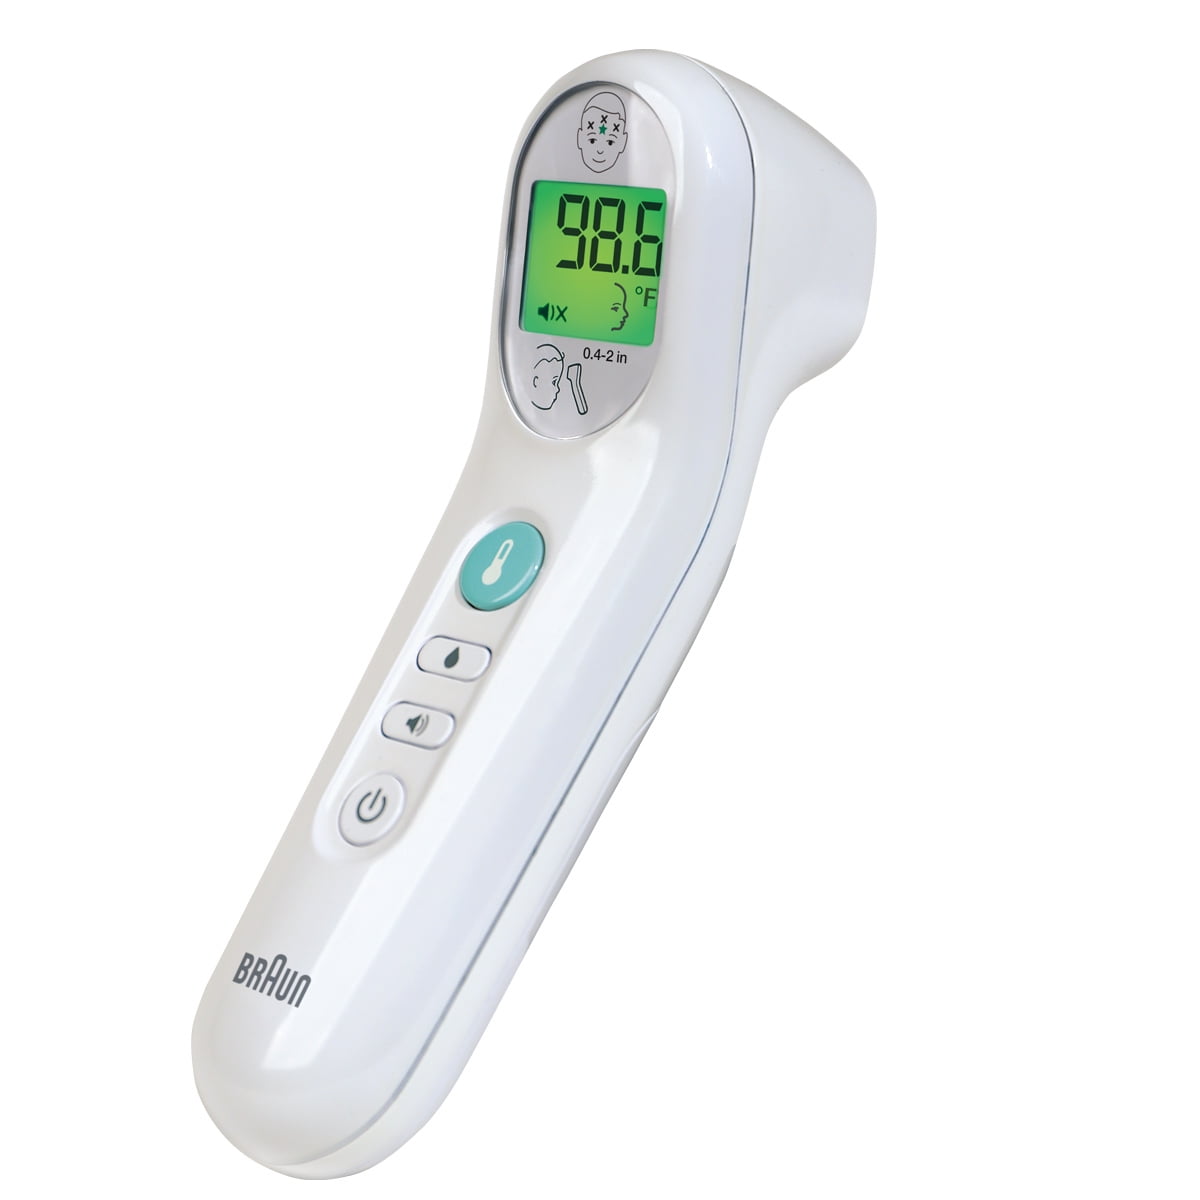 Braun No Touch Forehead Thermometer 3-in-1 FREE FAST DELIVERY Next Day! 